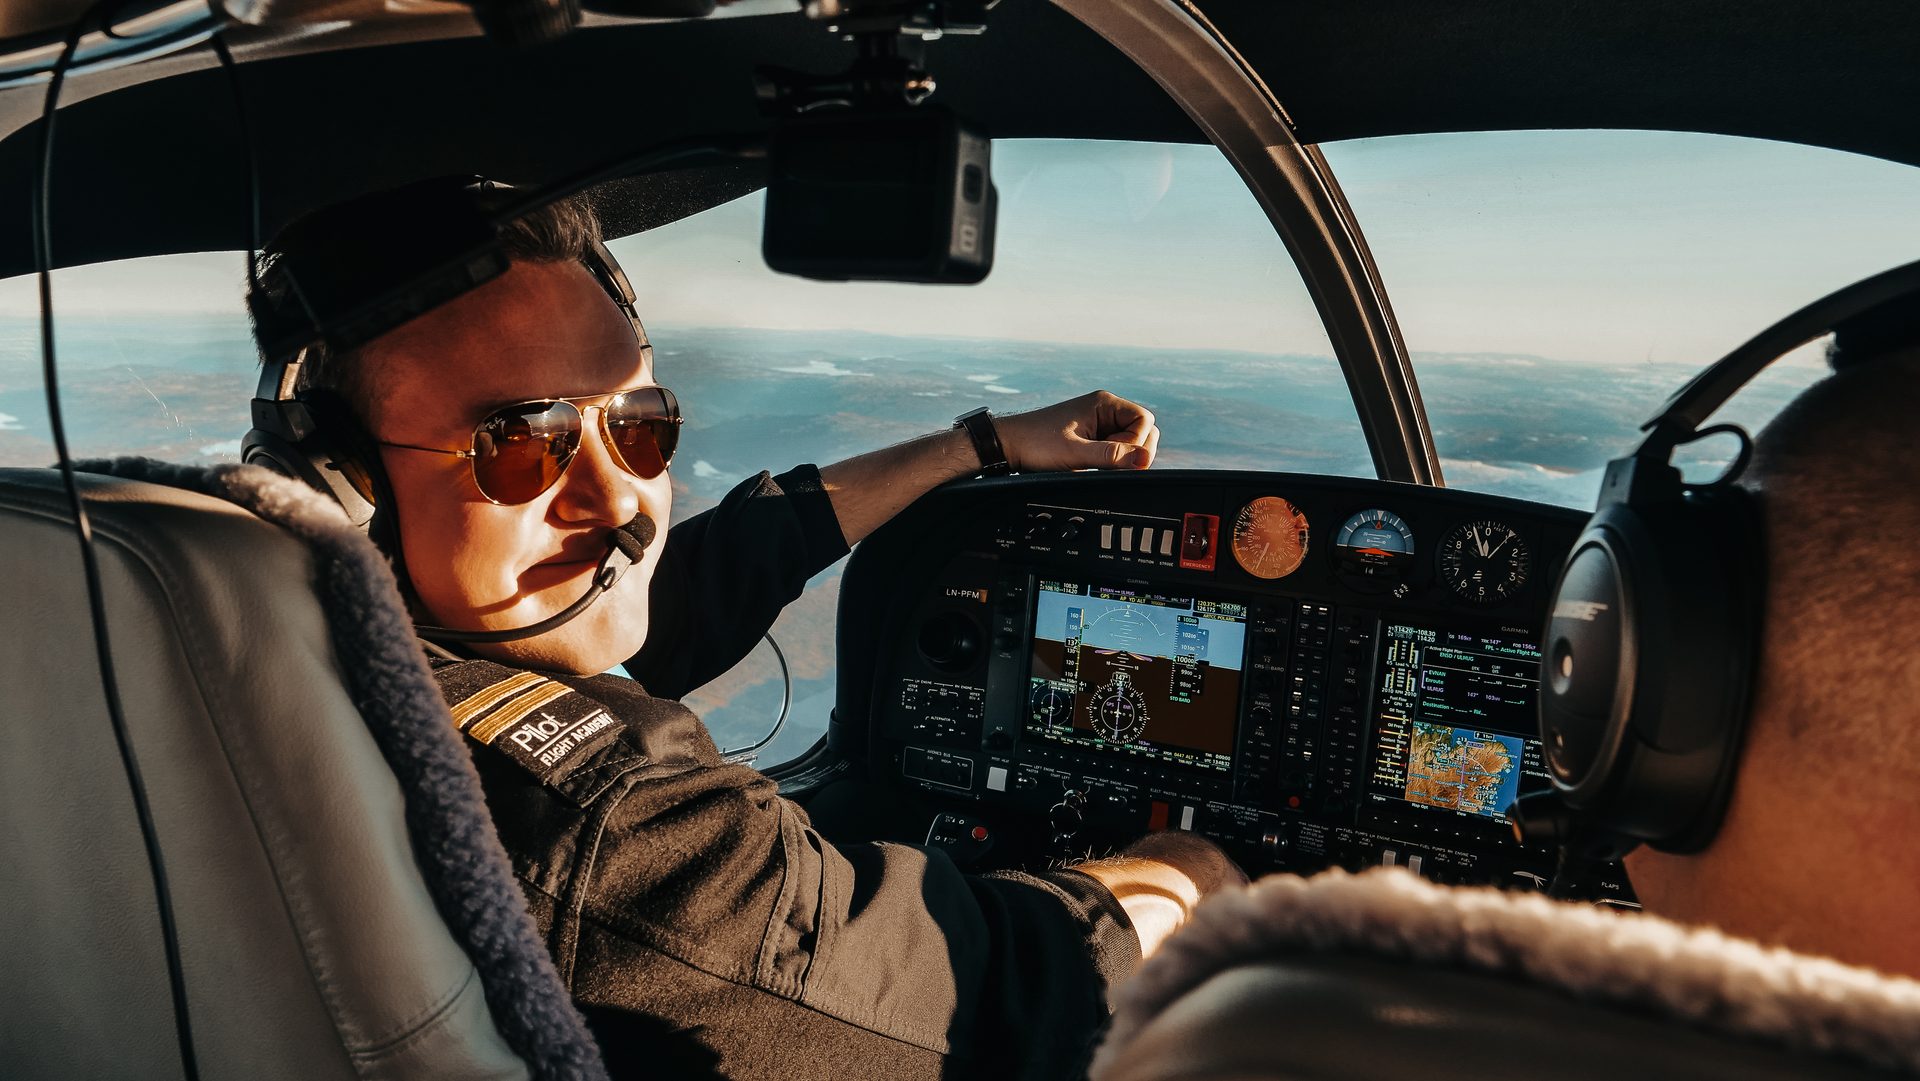 Flight instruments, Helicopter pilot, Air travel, Vehicle, Cockpit, Sunglasses, Aviation, Goggles, Aircraft